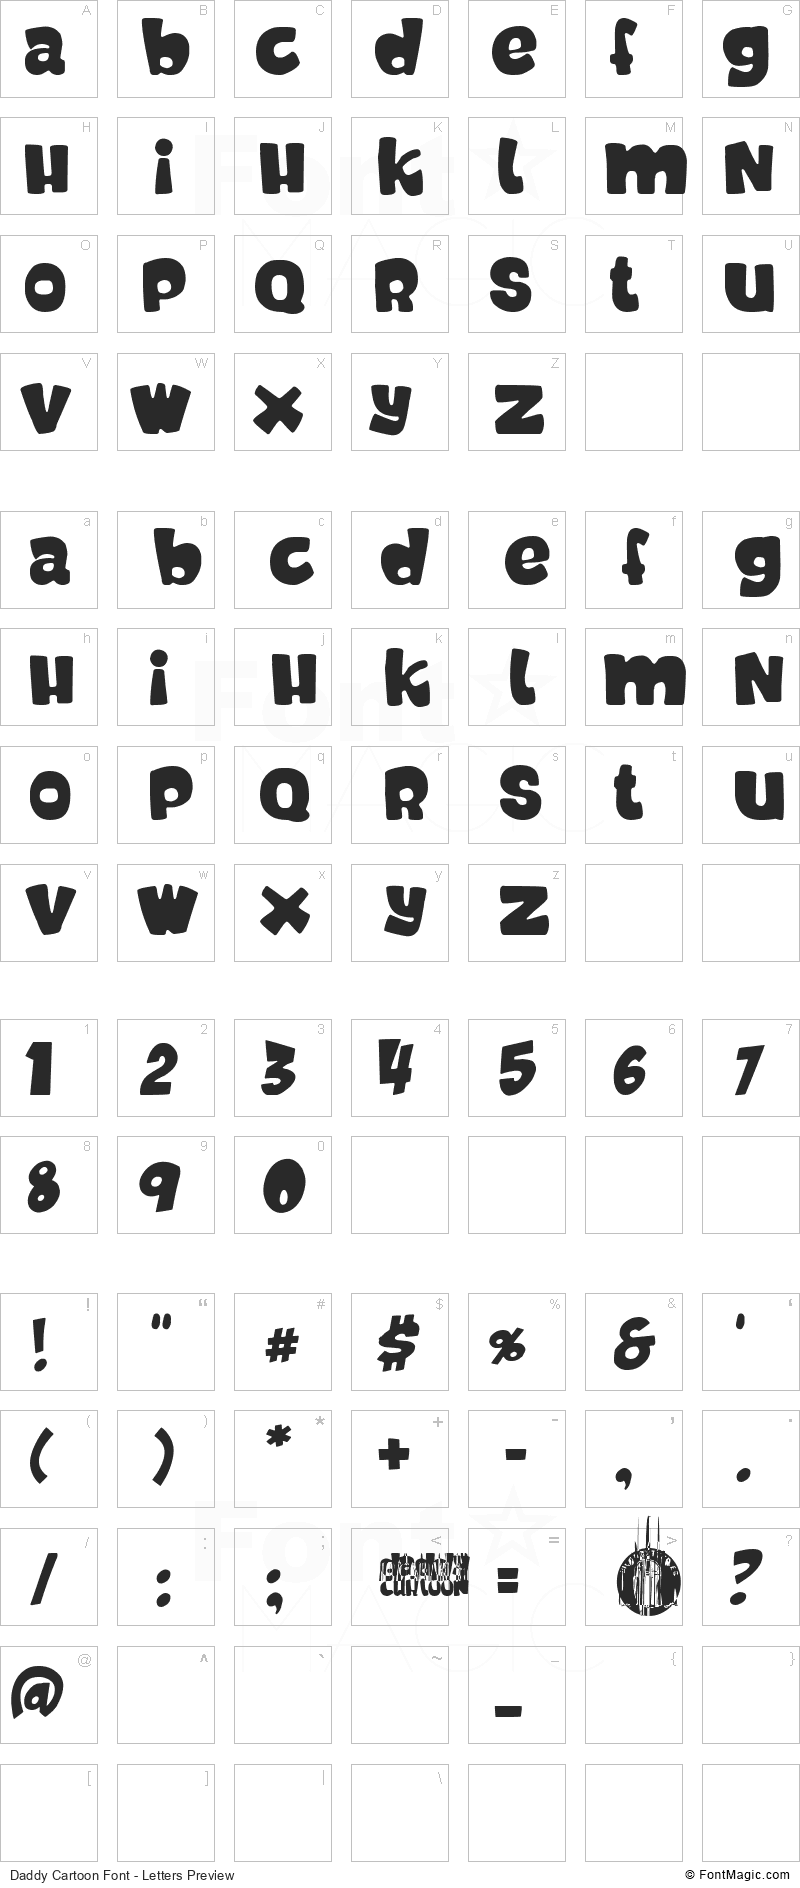 Daddy Cartoon Font - All Latters Preview Chart